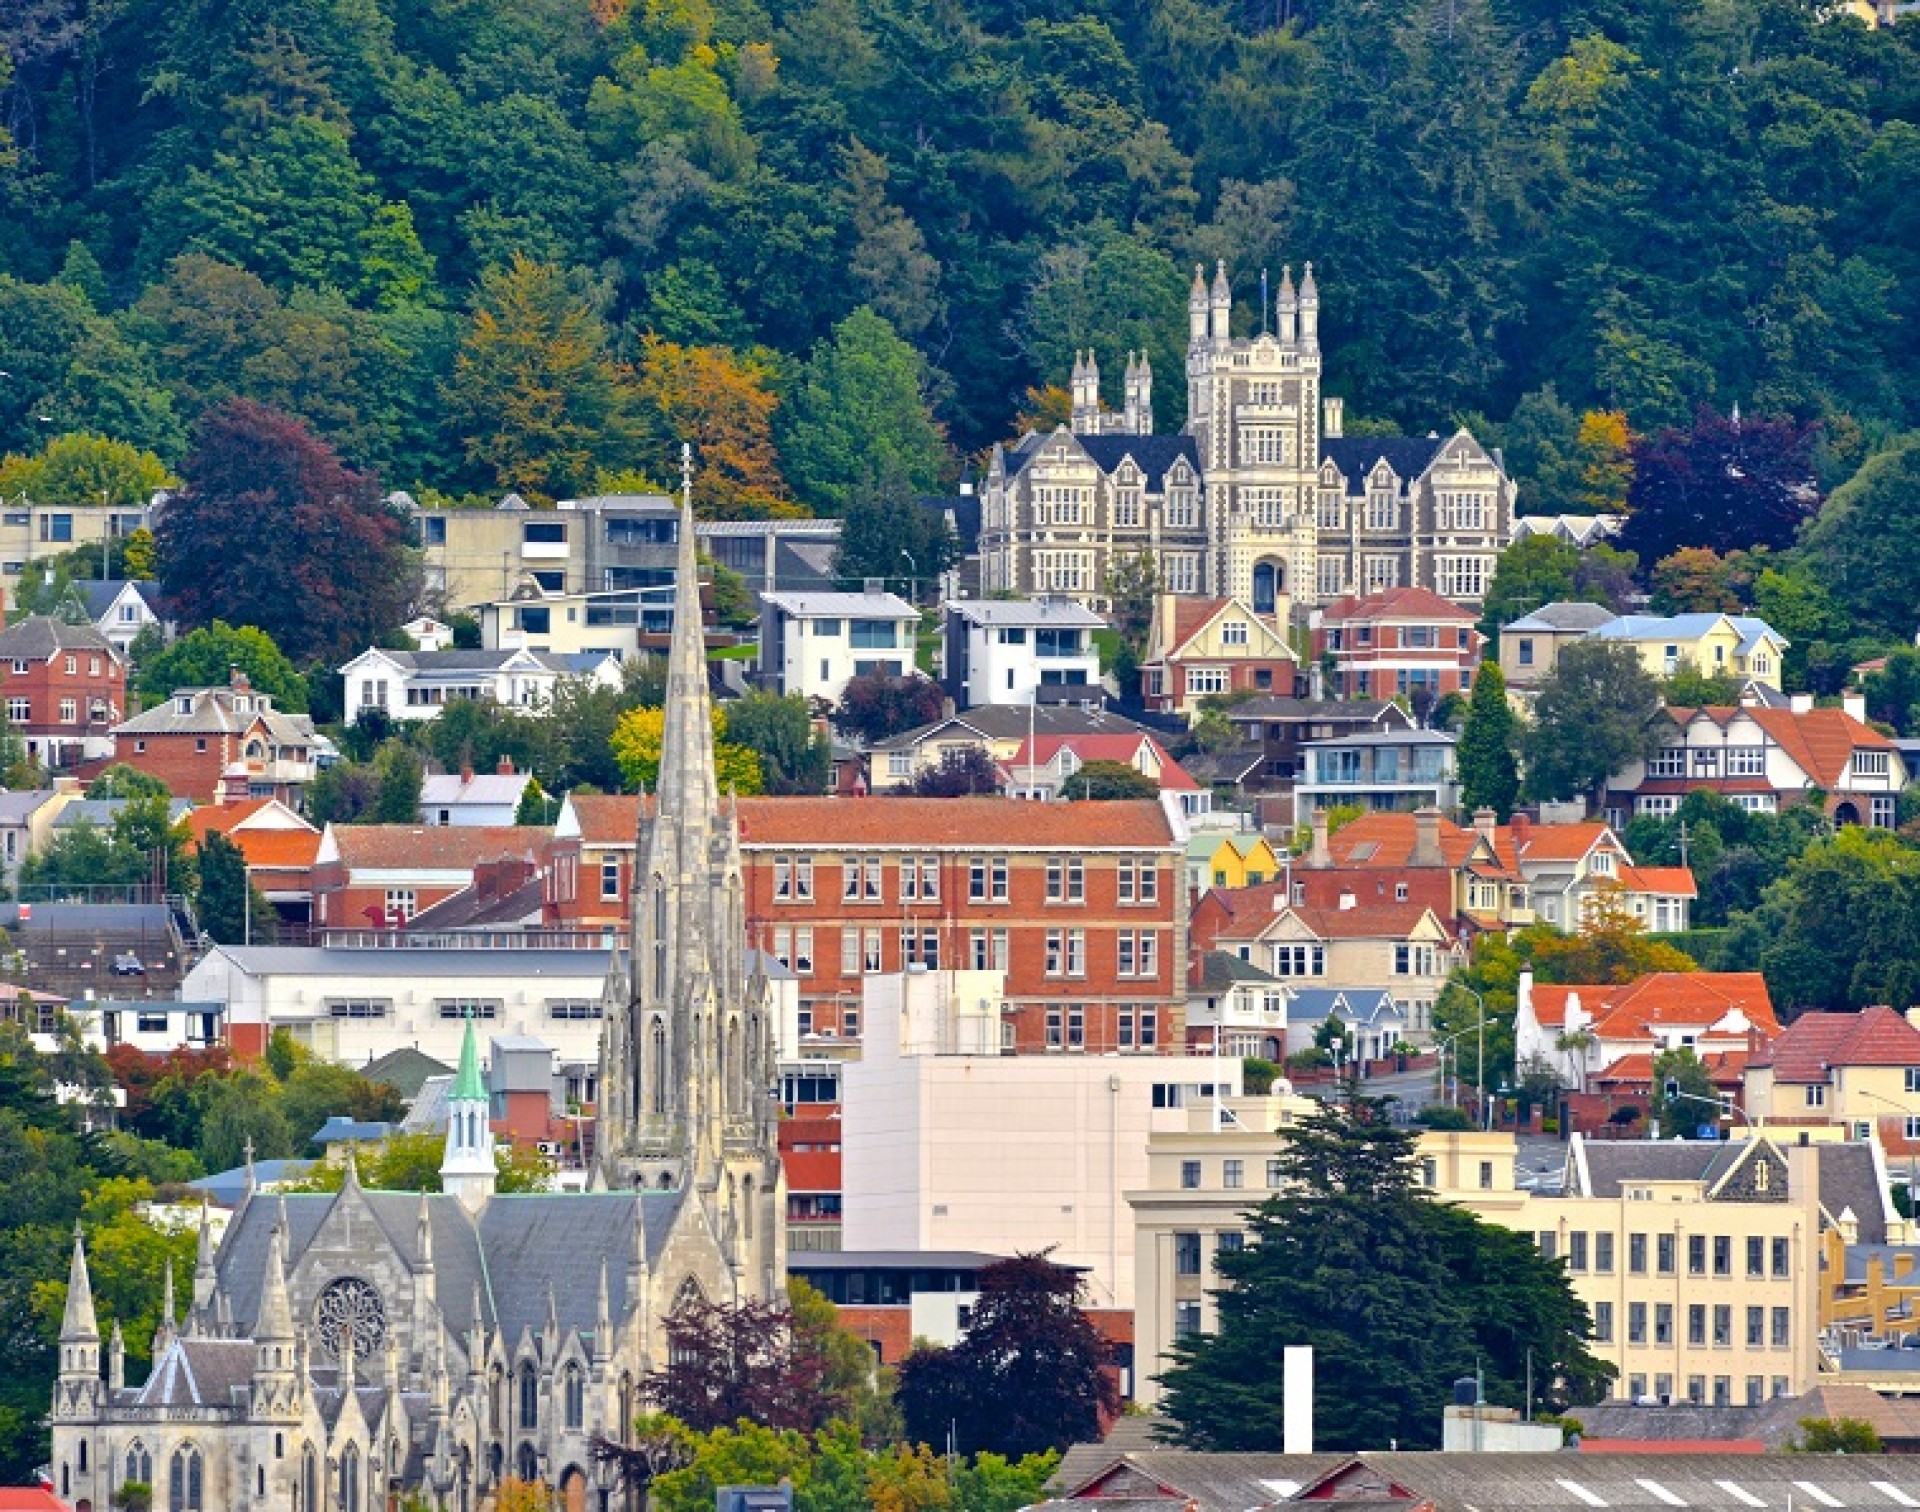 Dunedin's Stay and Play, Heritage Homes & Castles.